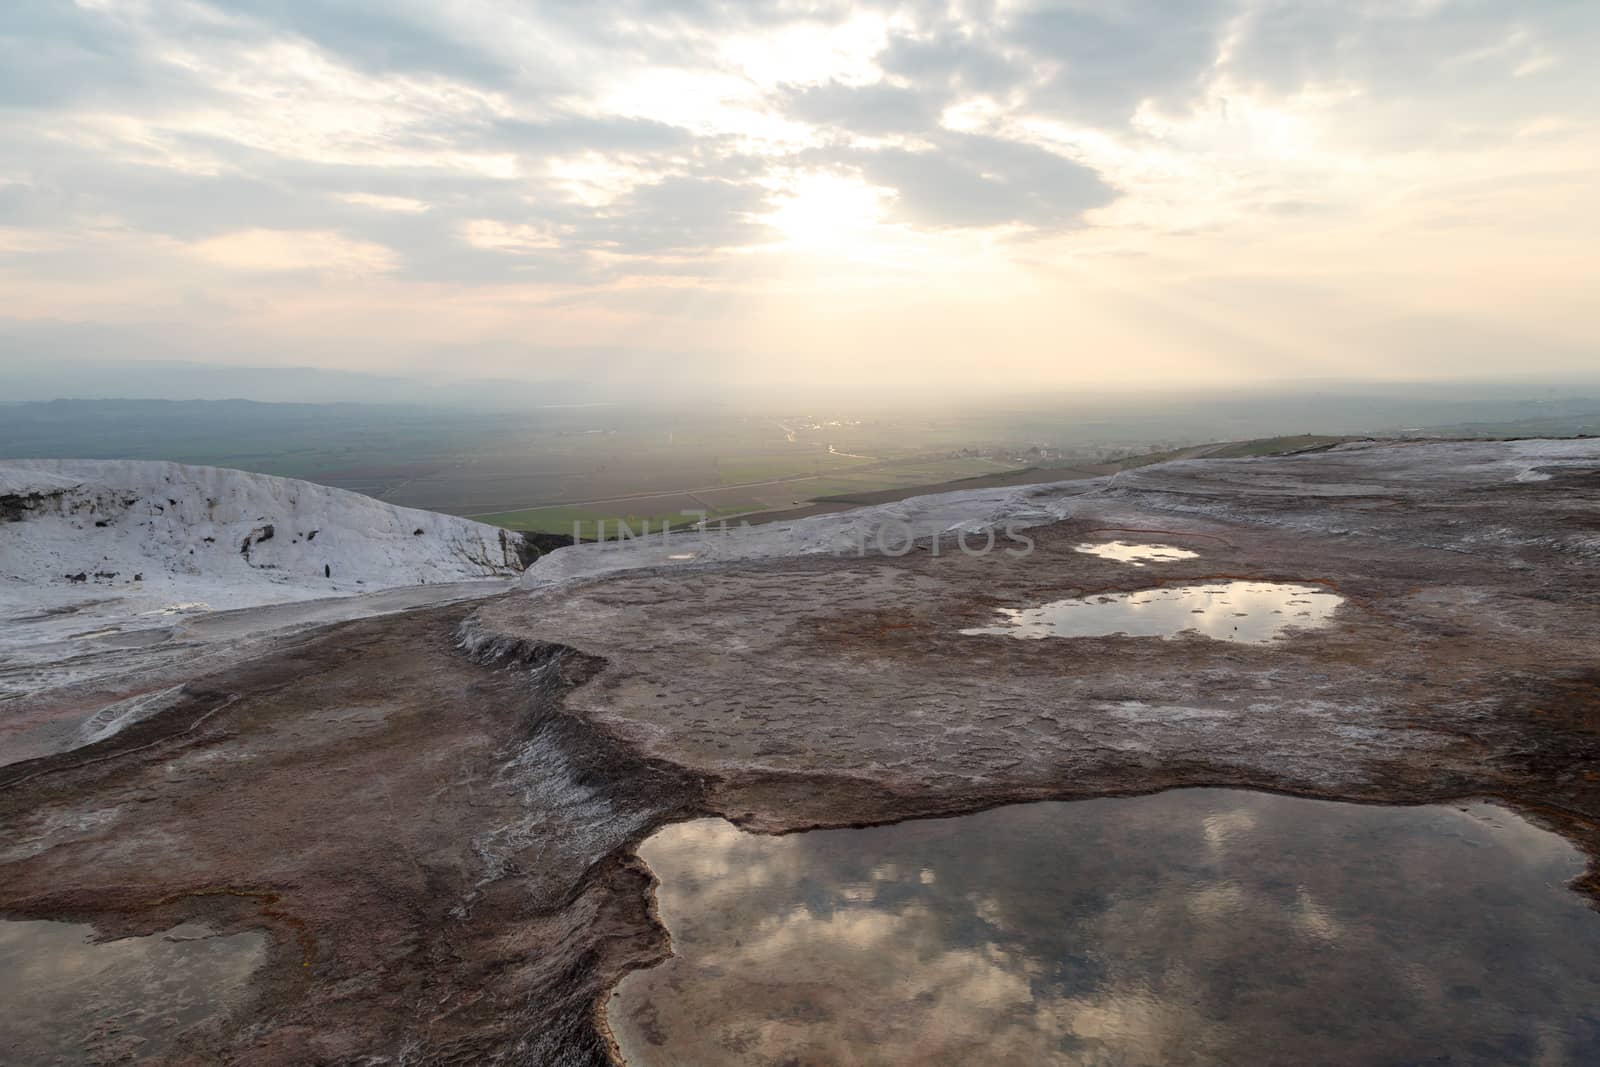 General view of Pamukkale Travertines with geographical formations on cloudy sky background at sunset time.